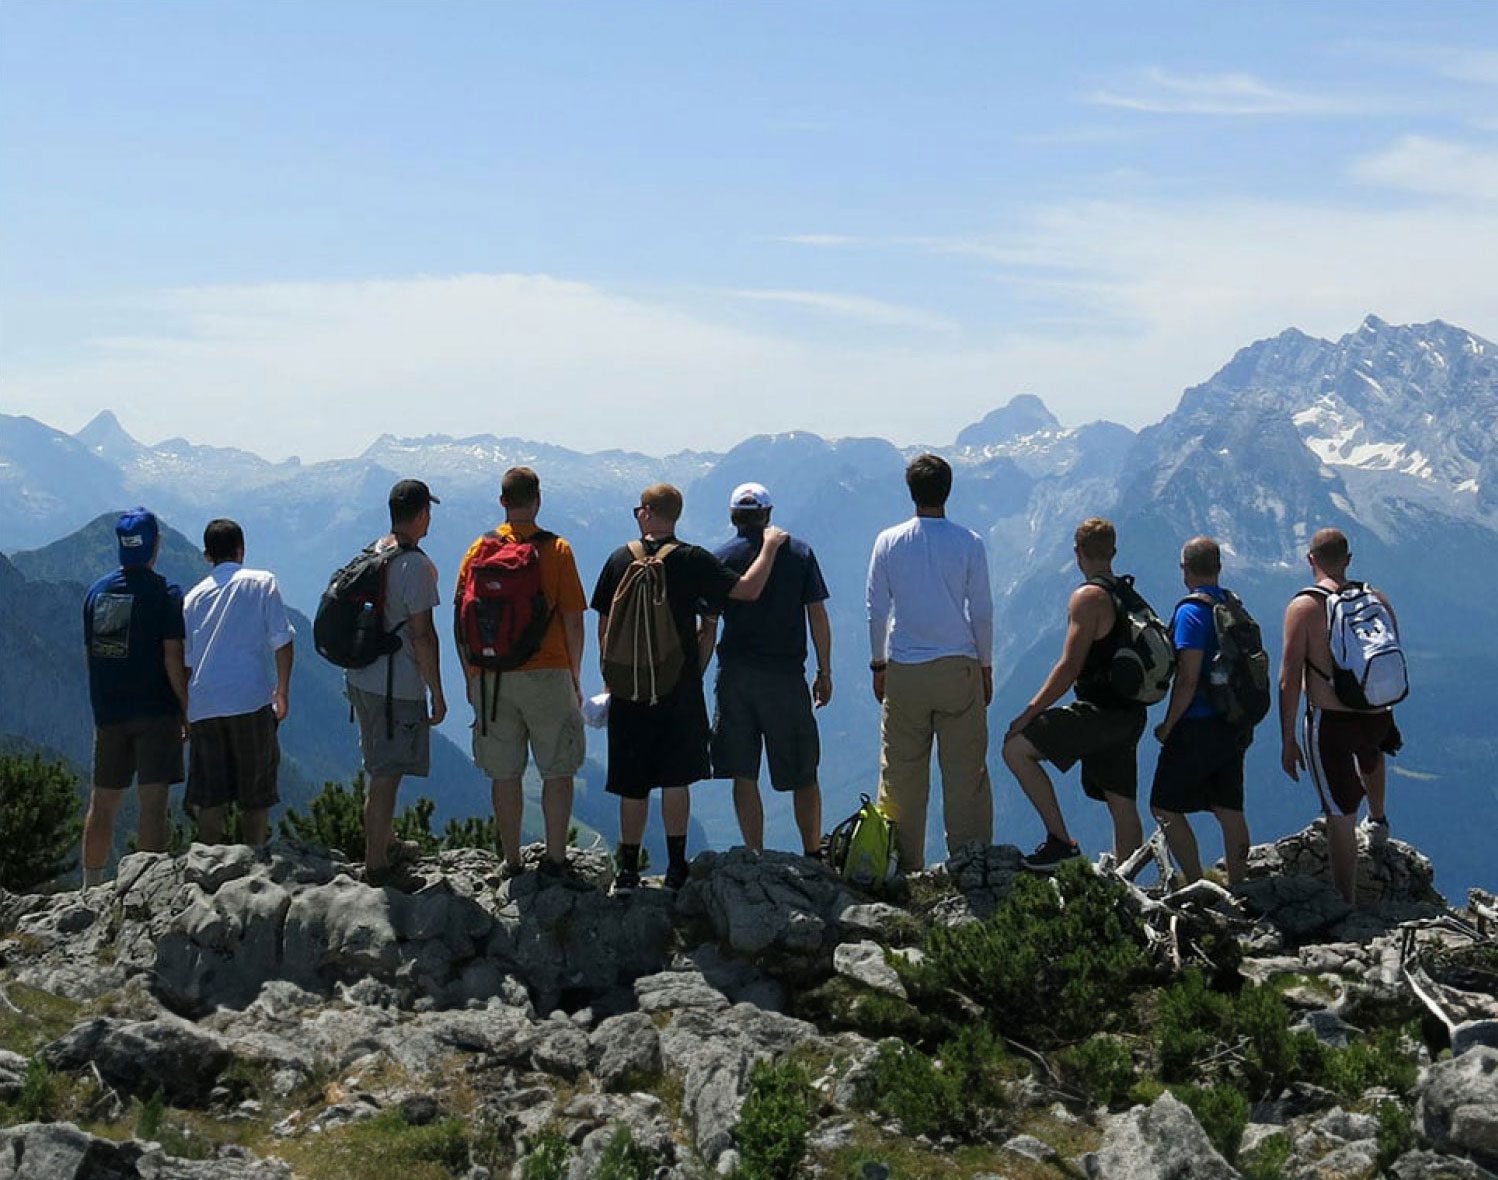 Ten young men look stand in a row across a mountain top and soak in the view of jagged peaks ahead.